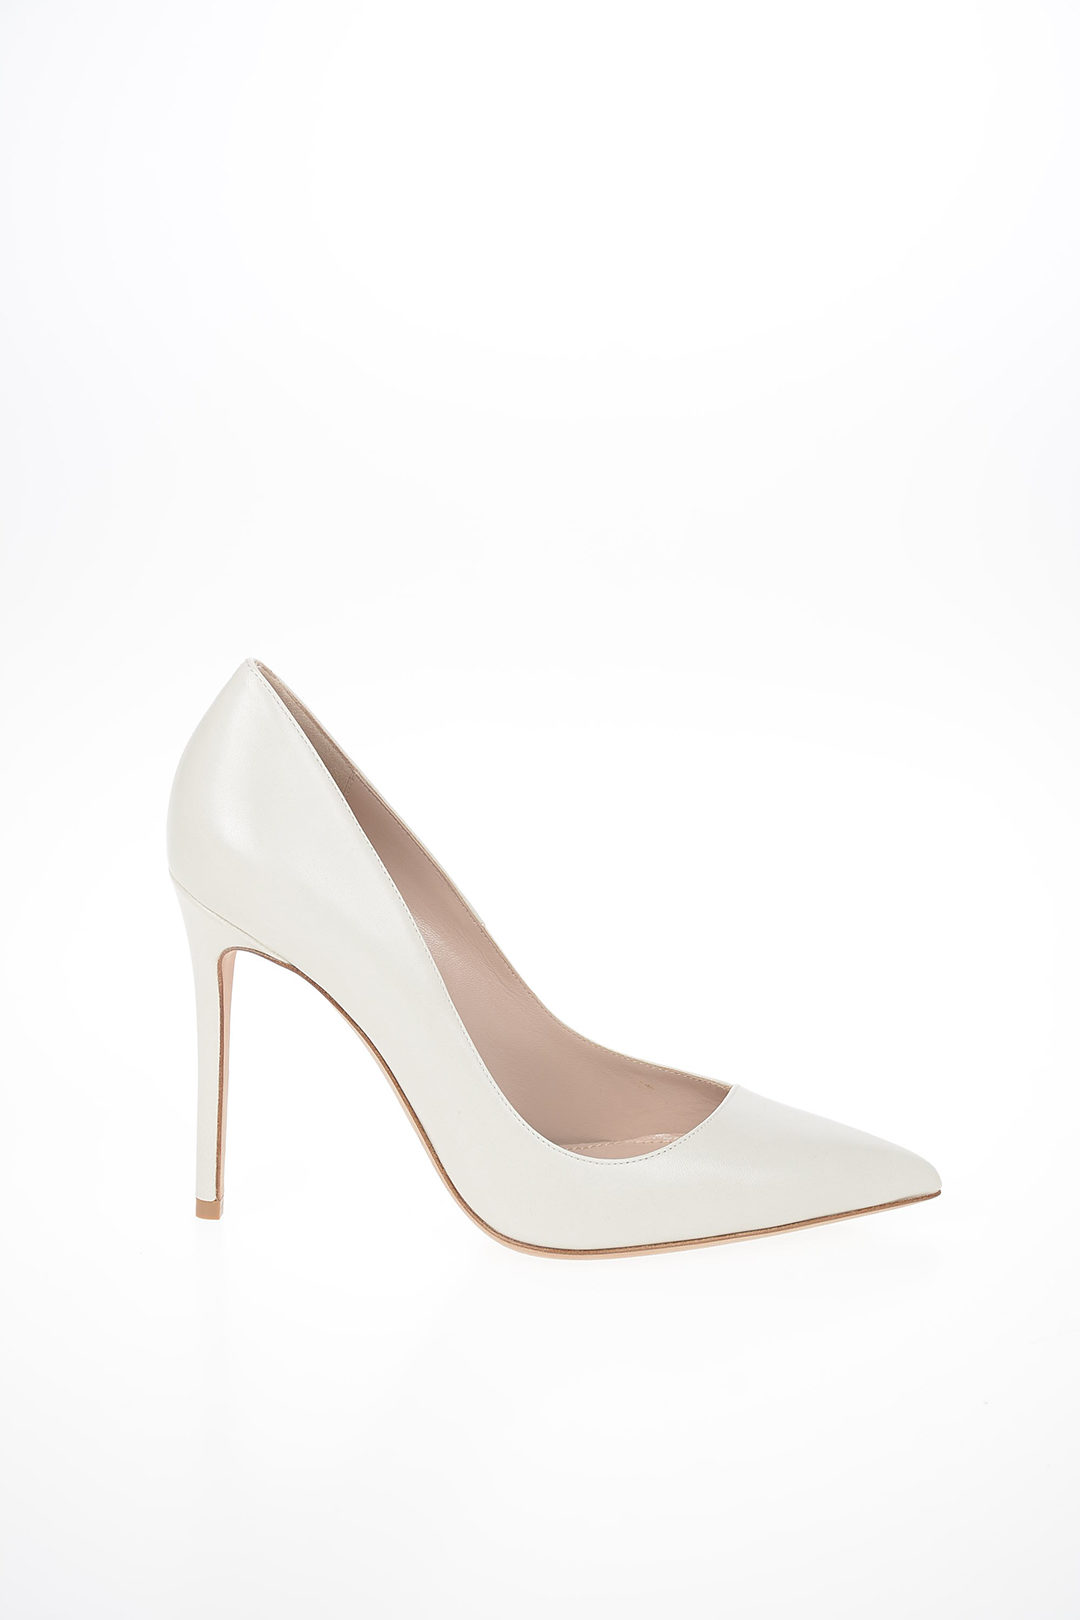 Manolo Blahnik BB Pointy Toe Pump in White Leather - Meghan Markle's Shoes  - Meghan's Fashion